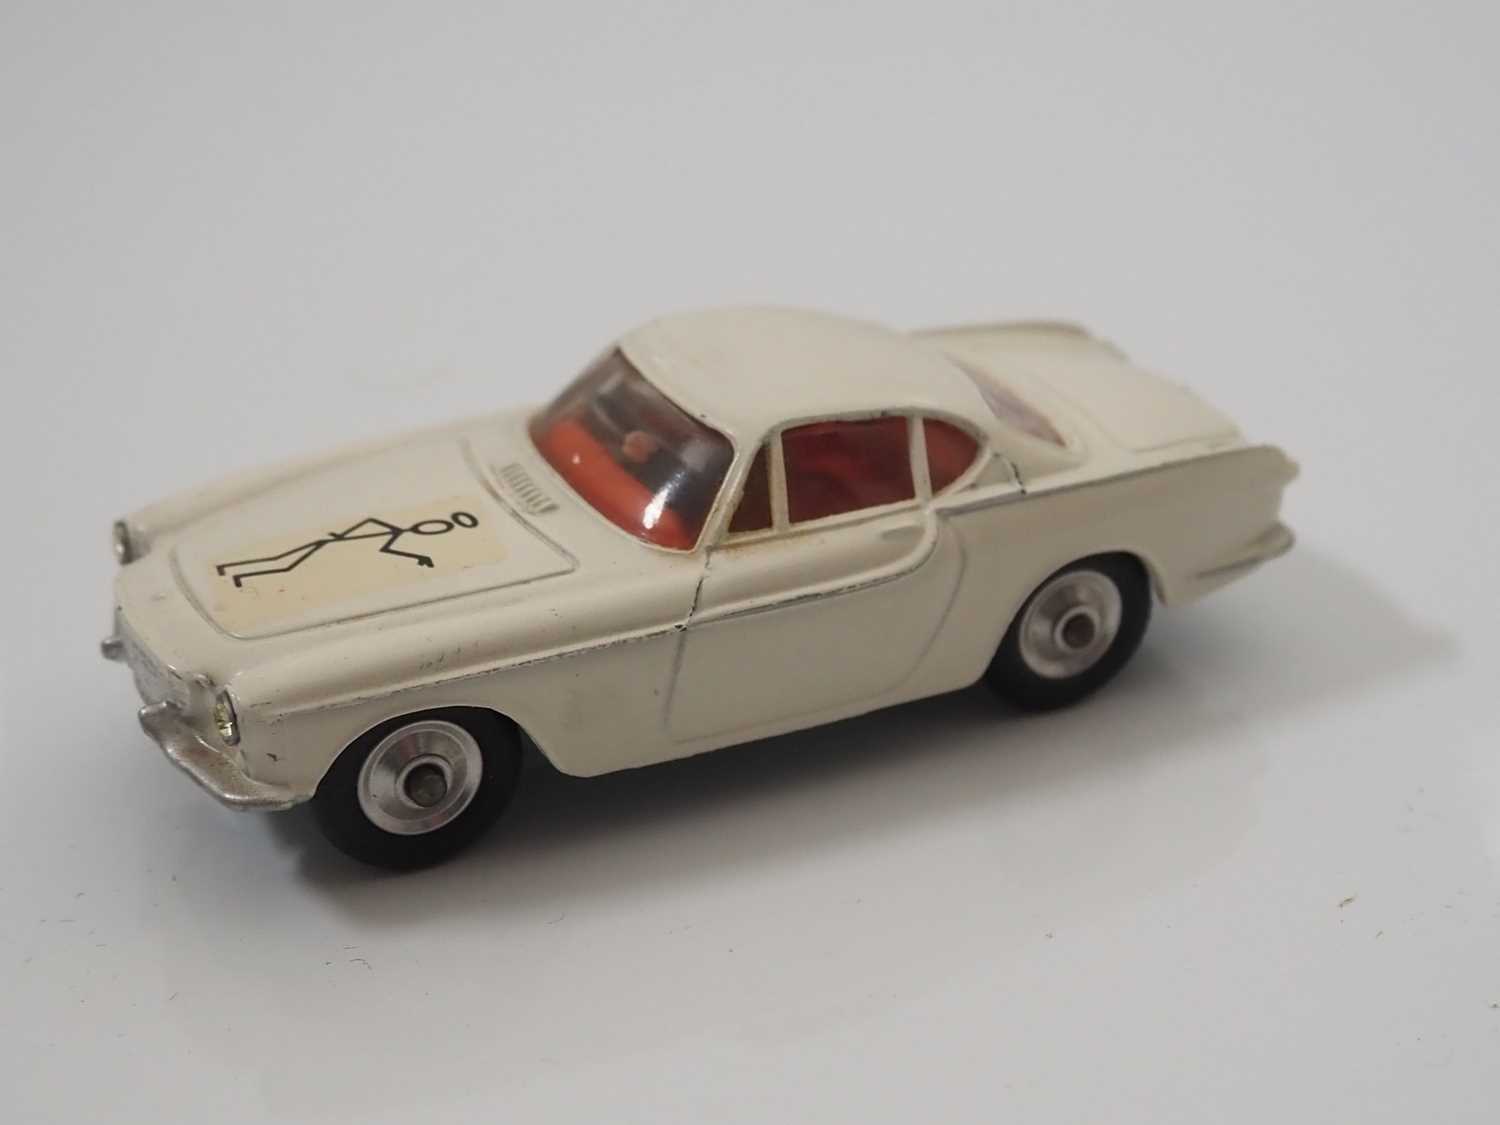 A CORGI 258 diecast 'The Saint's' Volvo P1800 with white body, red interior with figure, silver - Image 2 of 5